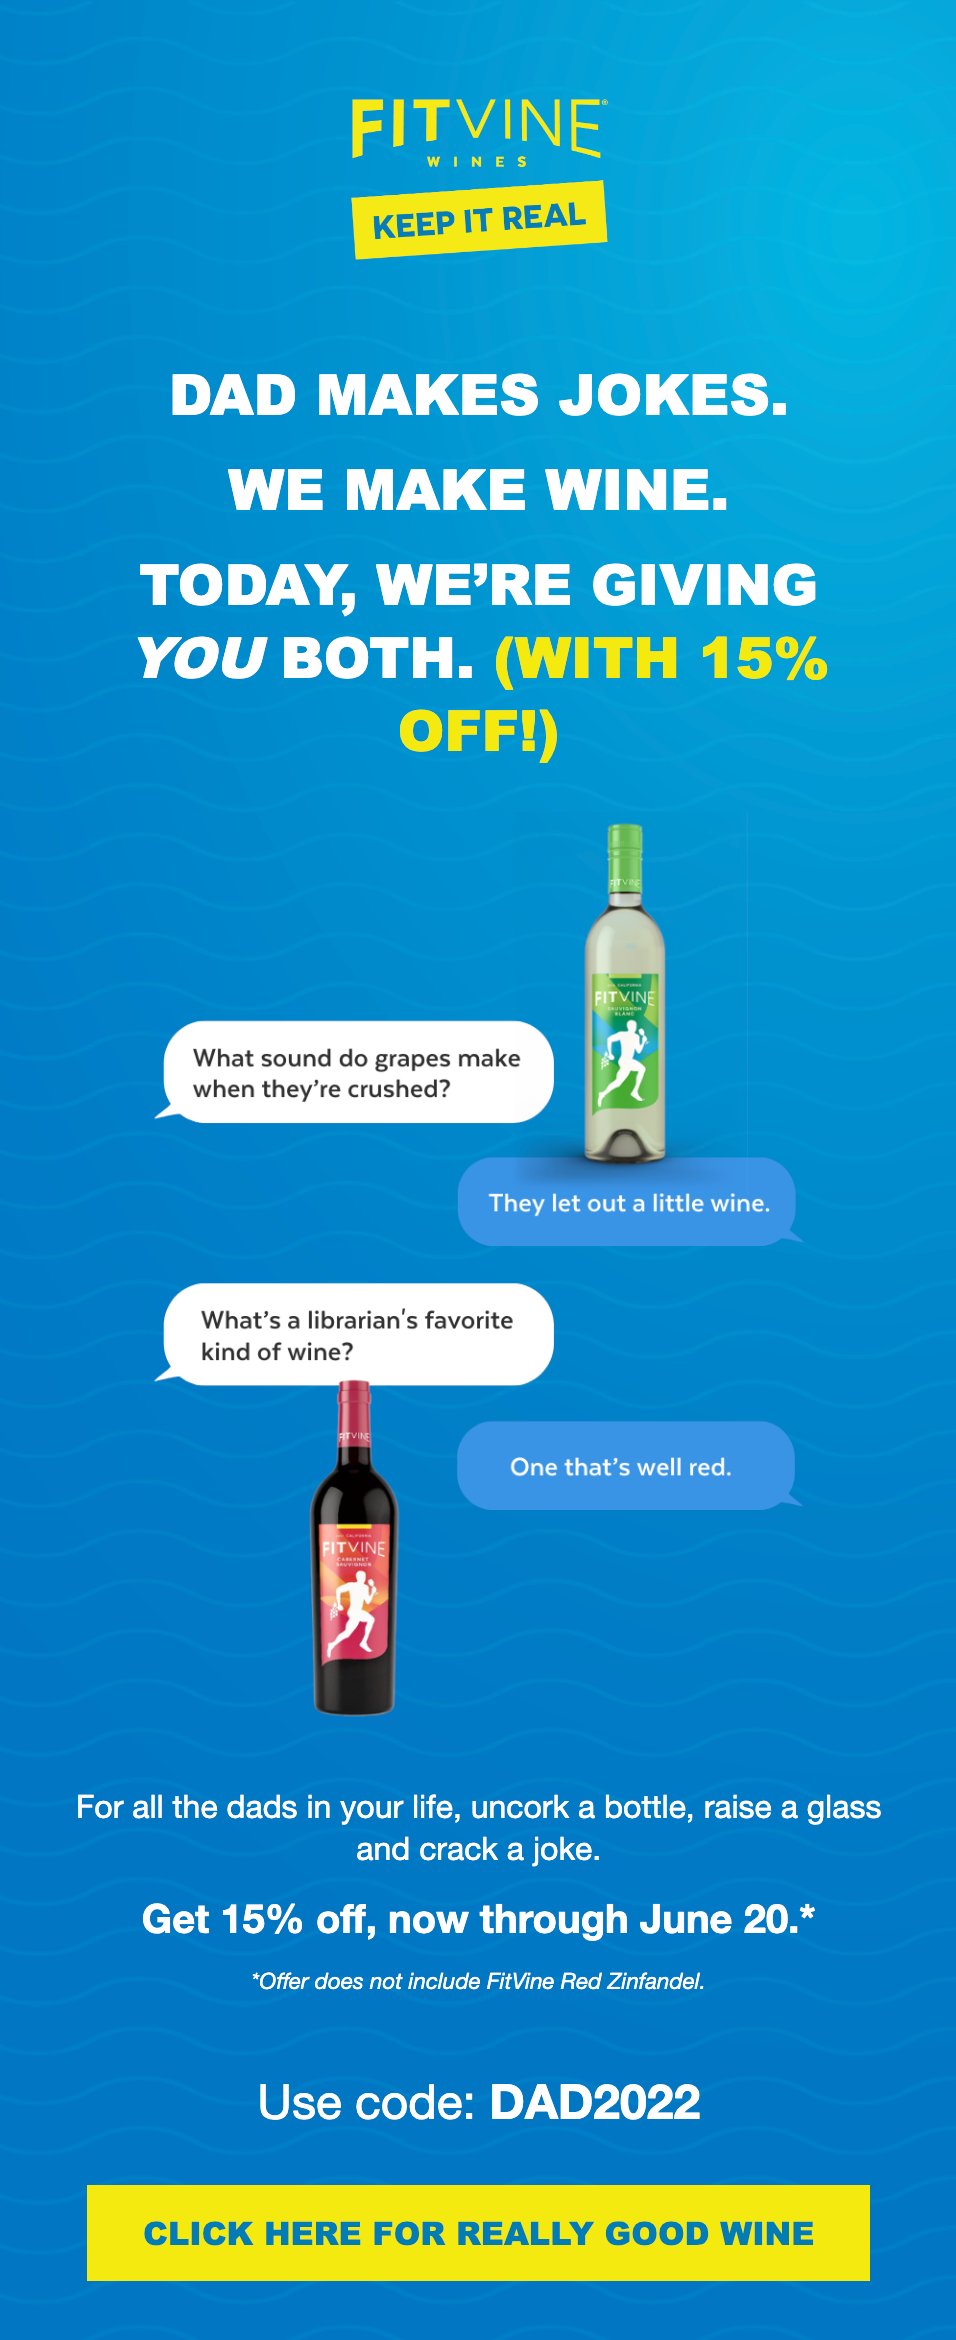 Father's Day newsletter example from Fitvine that shows two wine bottles telling each other Dad jokes on a blue background.